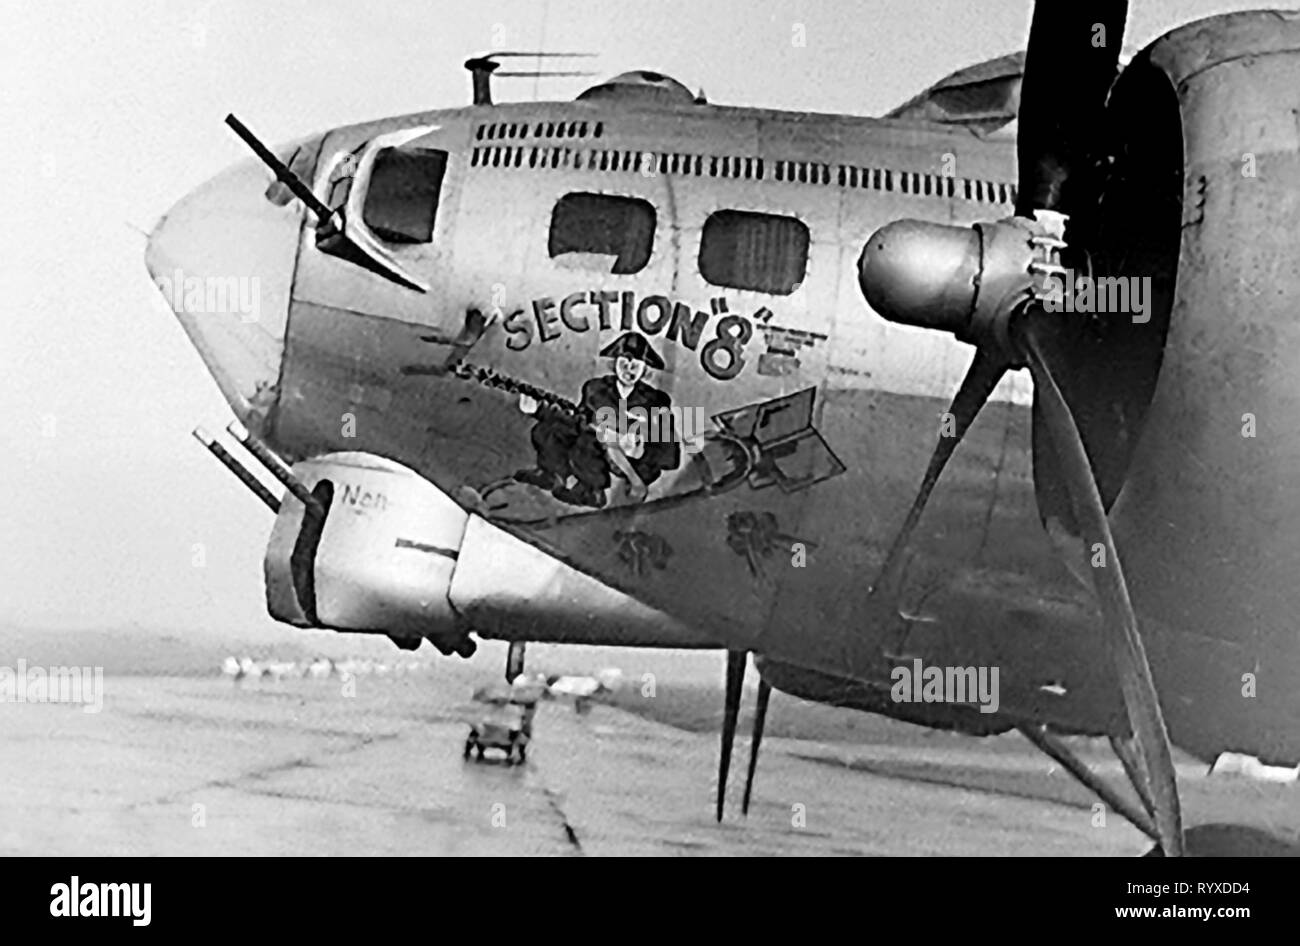 Personal photographs and memorabilia of fighting Americans during the Second World War. B-17 Flying Fortress heavy bomber nose art. Stock Photo